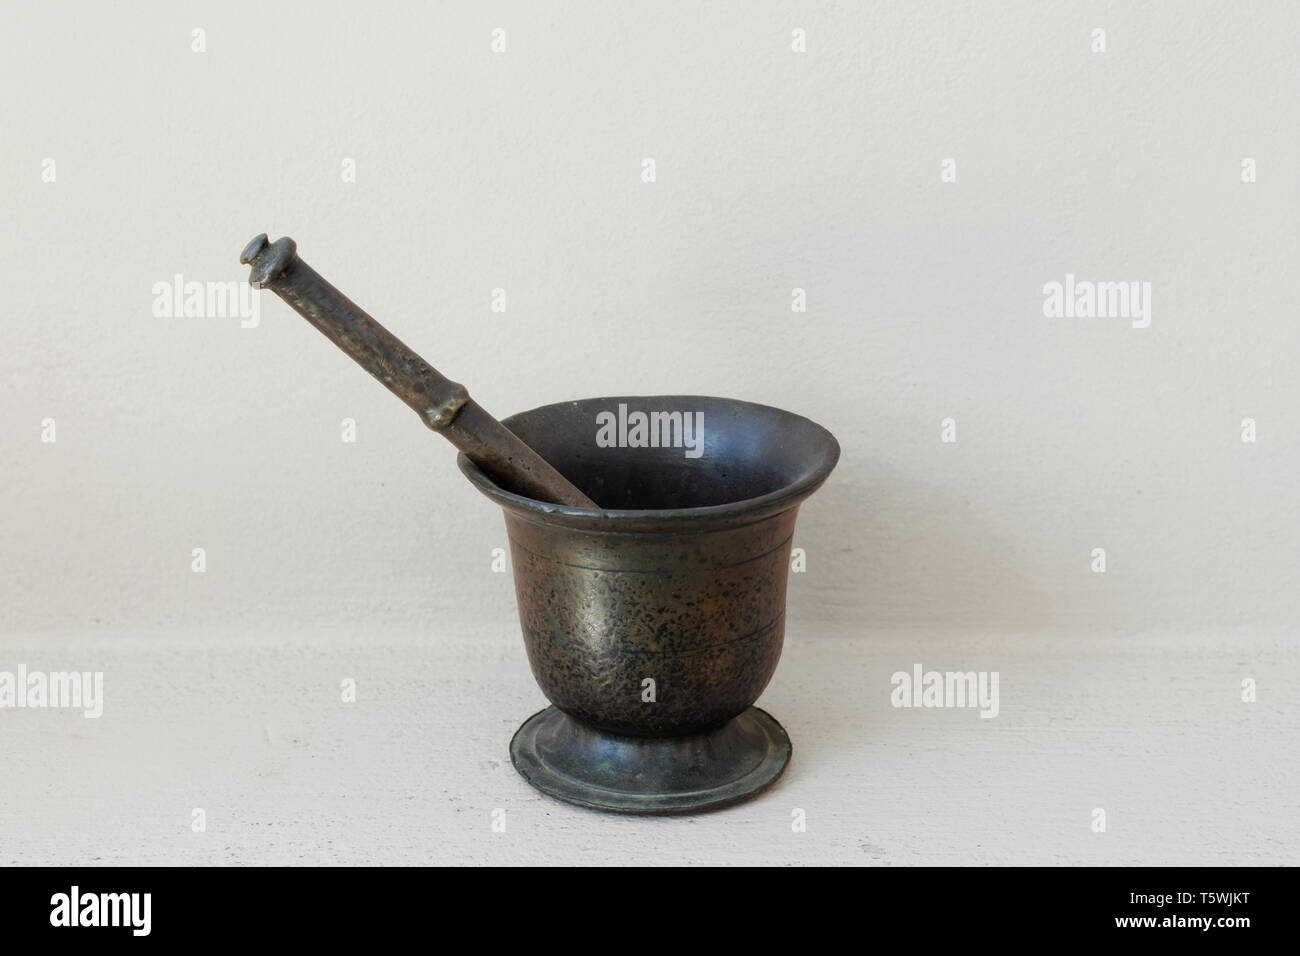 Vintage mortar and pestle. Antique brass kitchenware tool. Stock Photo